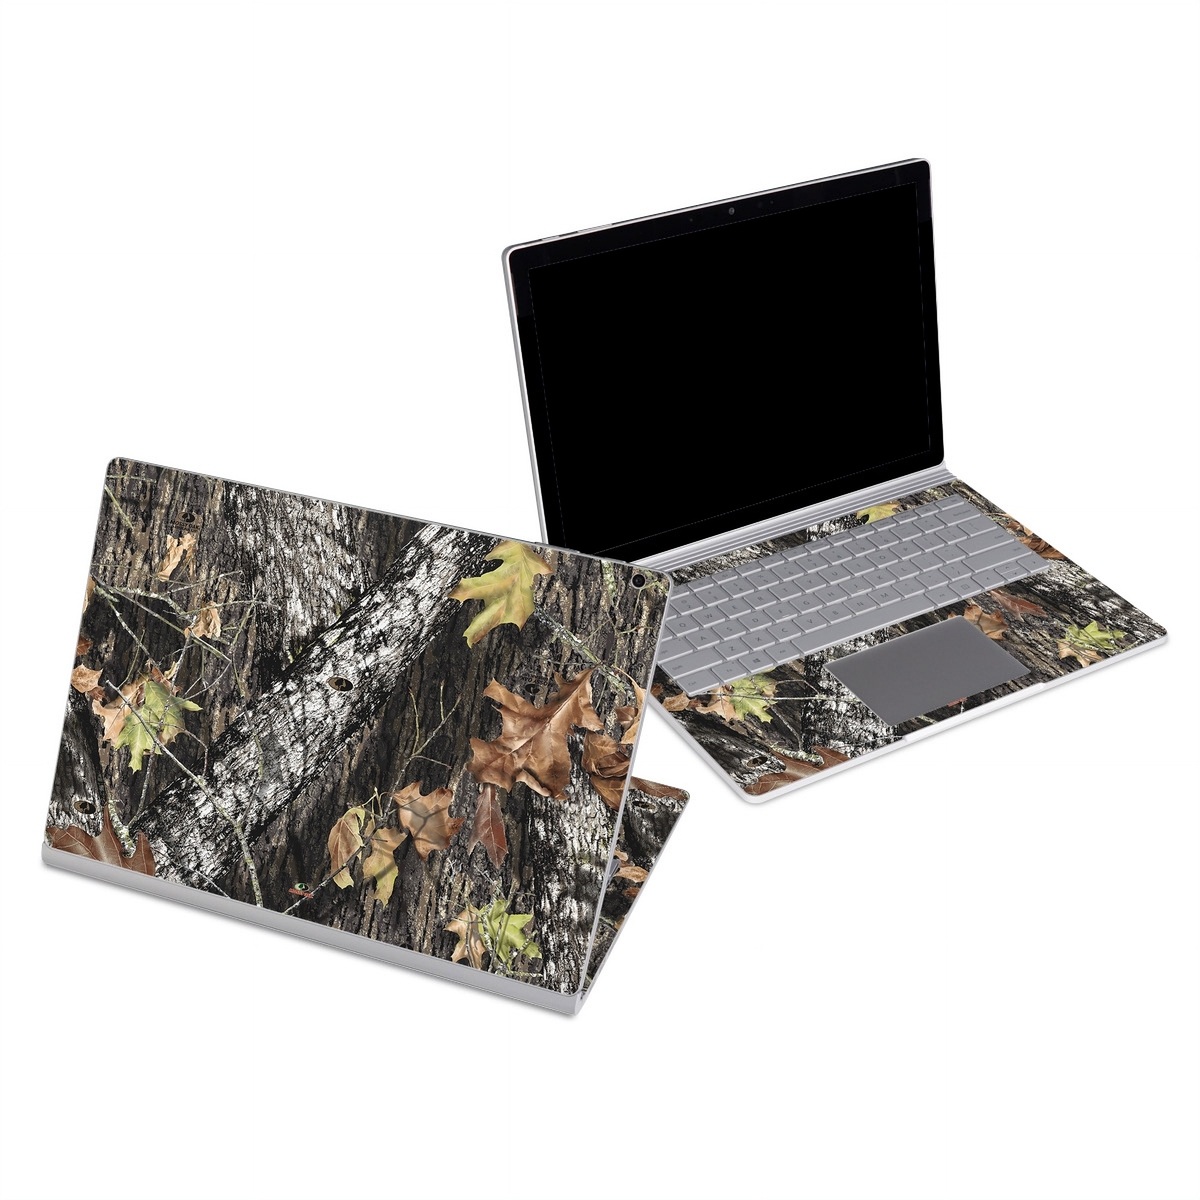 Microsoft Surface Book Series Skin design of Leaf, Tree, Plant, Adaptation, Camouflage, Branch, Wildlife, Trunk, Root, with black, gray, green, red colors